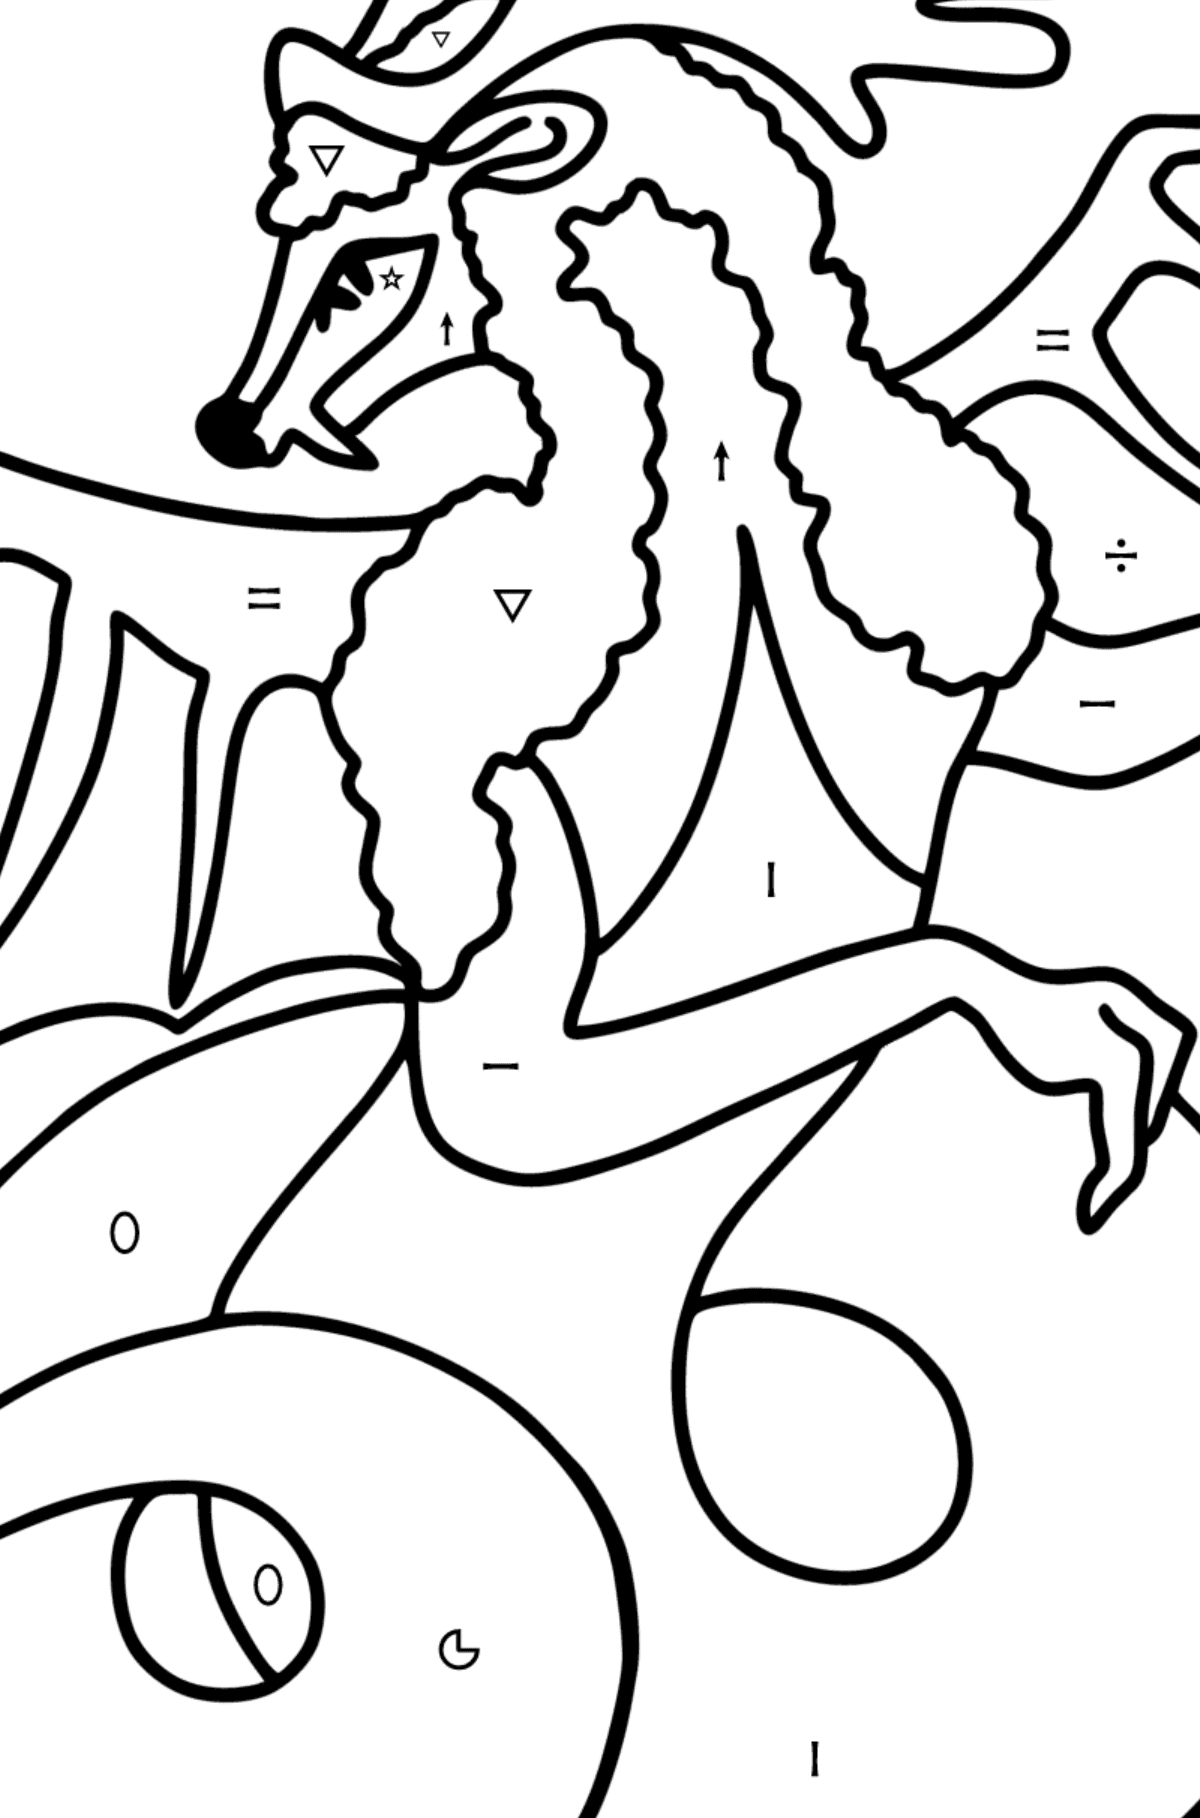 Beautiful Dragon coloring page - Coloring by Symbols and Geometric Shapes for Kids